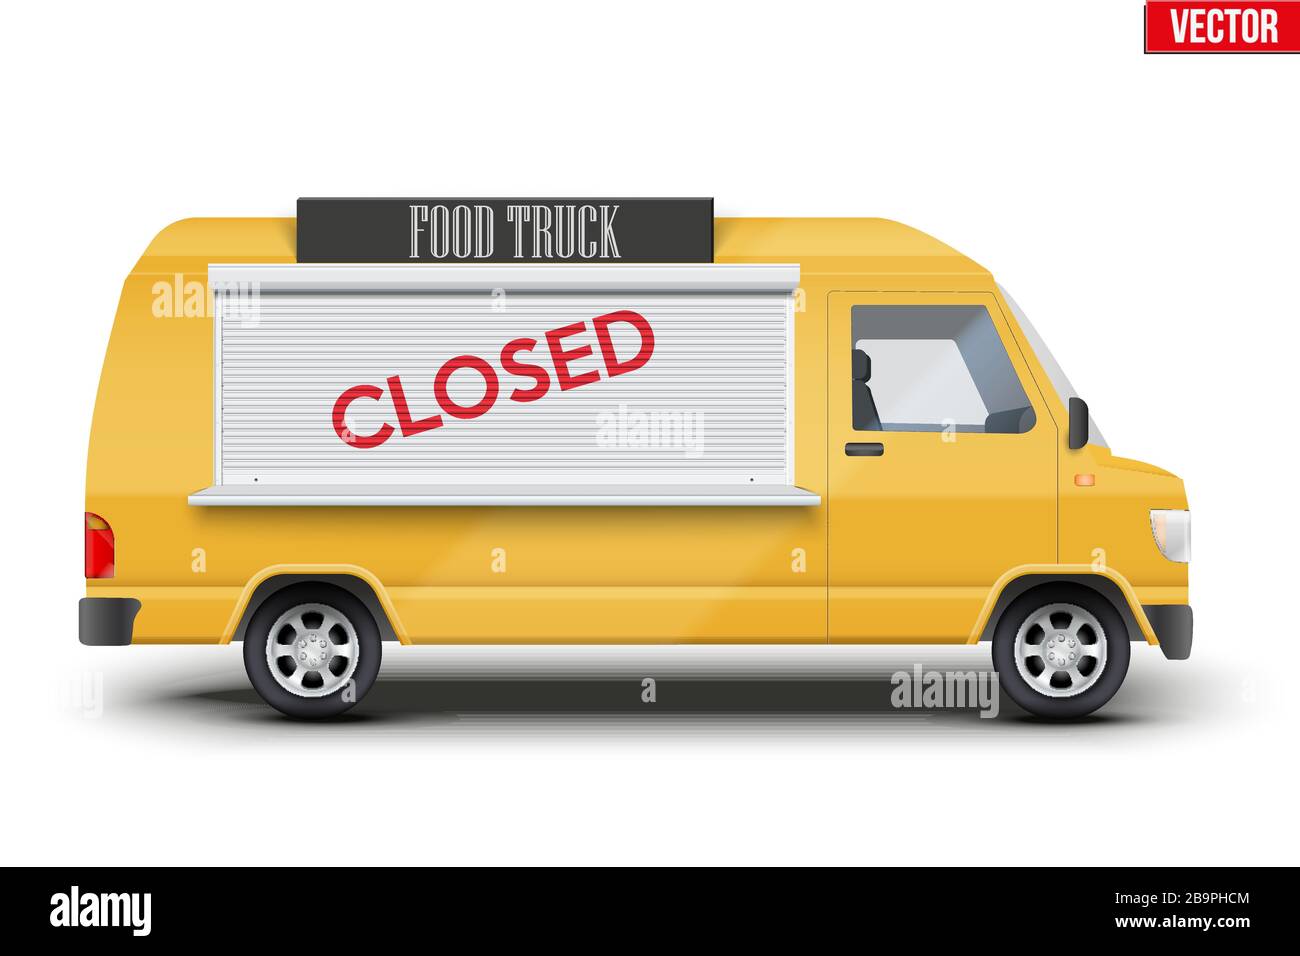 Food Truck Trailer is closed Stock Vector